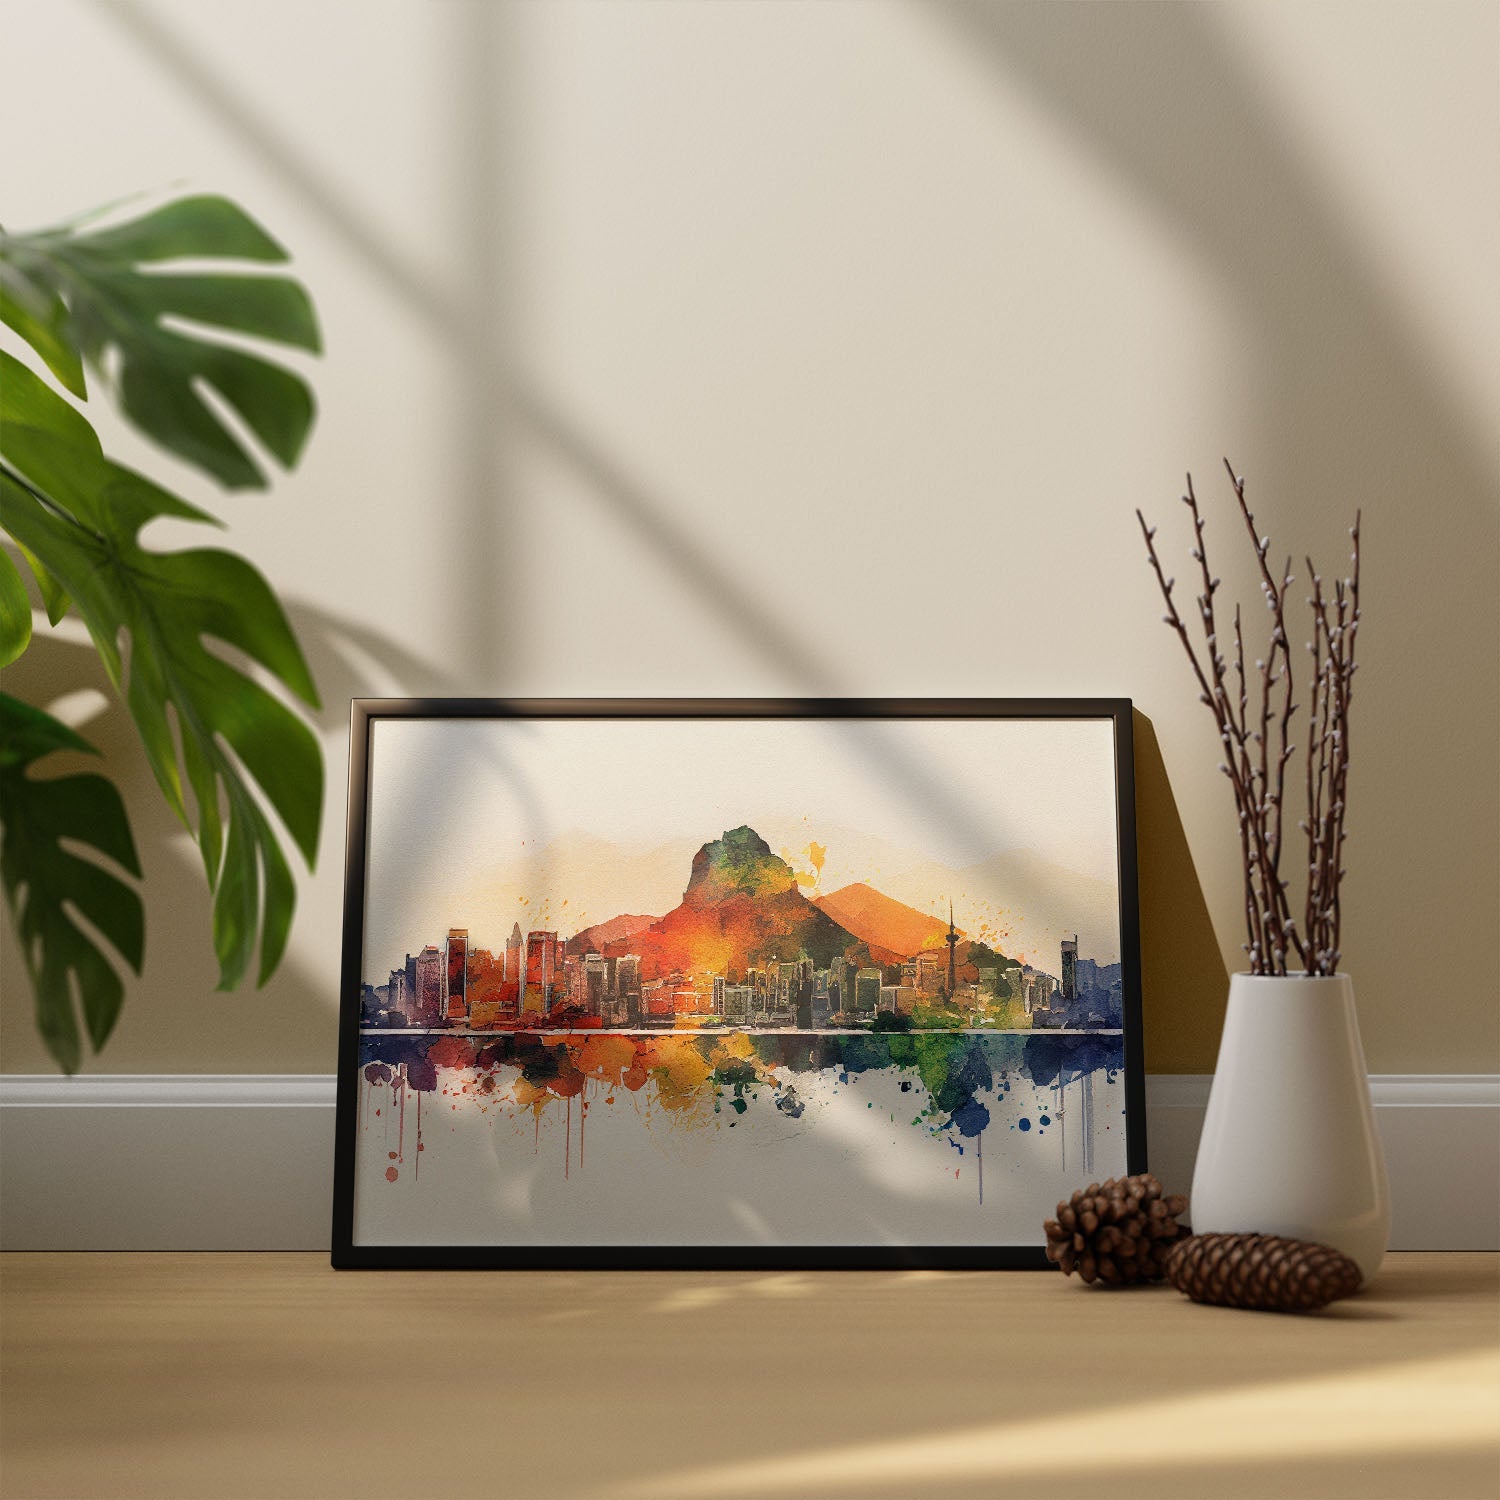 Nacnic watercolor of a skyline of the city of Rio de Janeiro_3. Aesthetic Wall Art Prints for Bedroom or Living Room Design.-Artwork-Nacnic-A4-Sin Marco-Nacnic Estudio SL